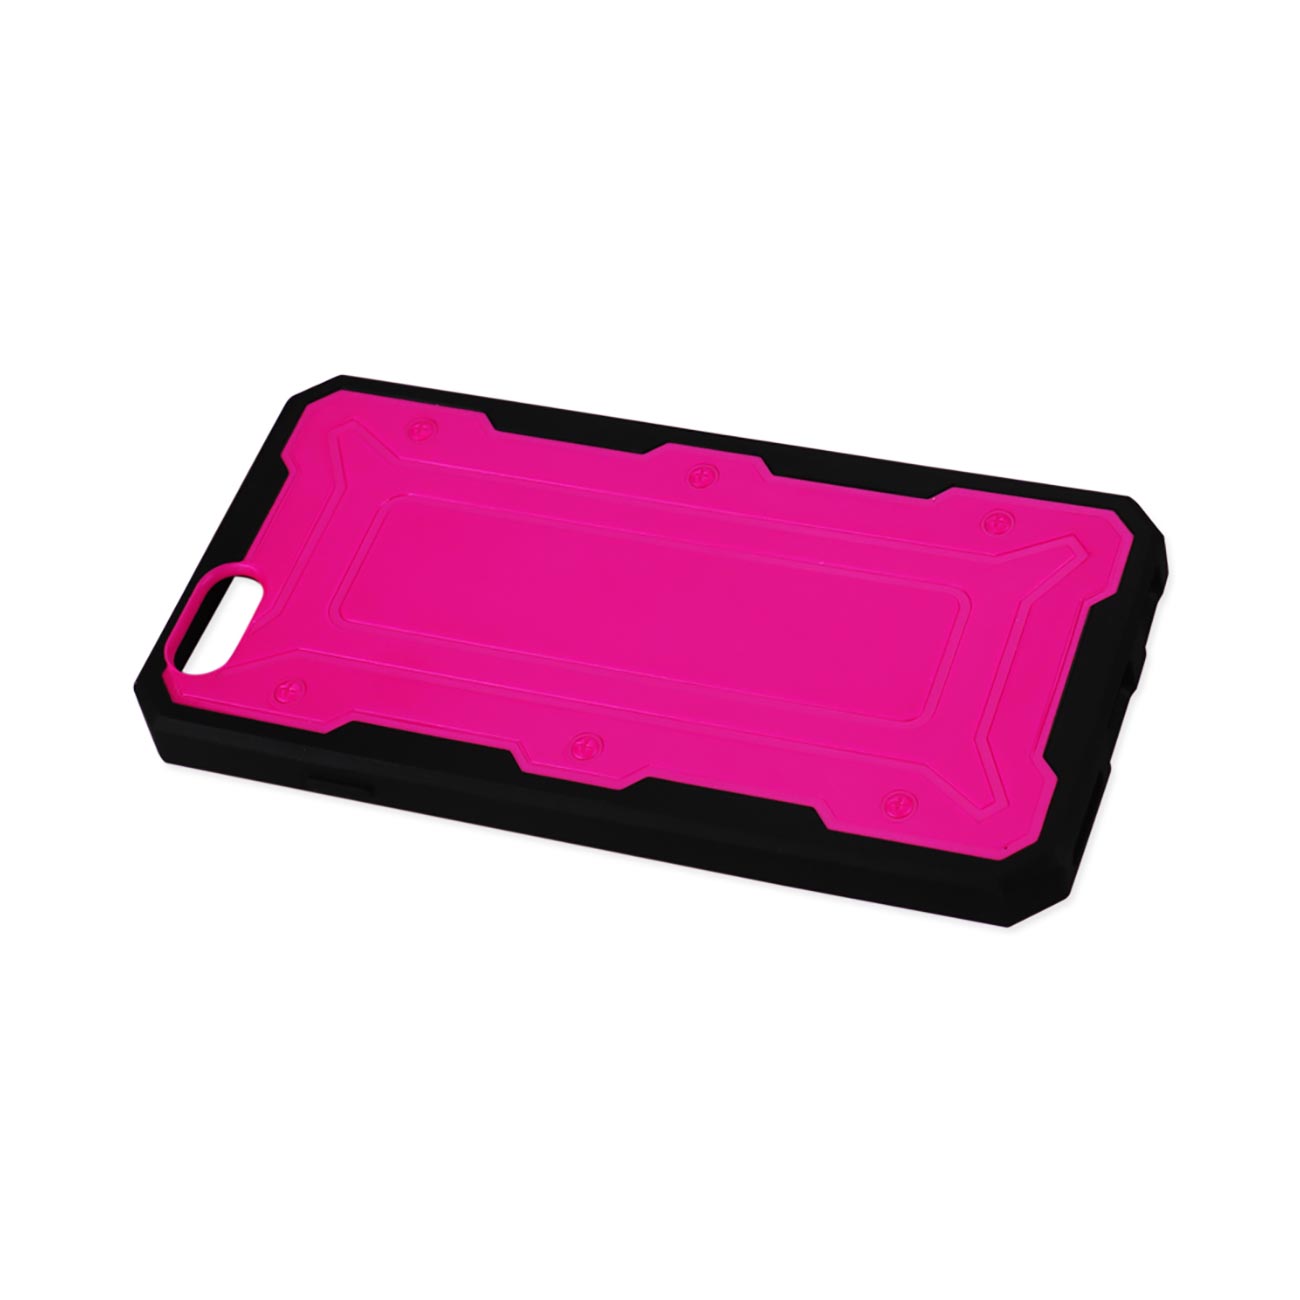 iPhone 6 Dual Color Transformer Case In Hot Pink Black